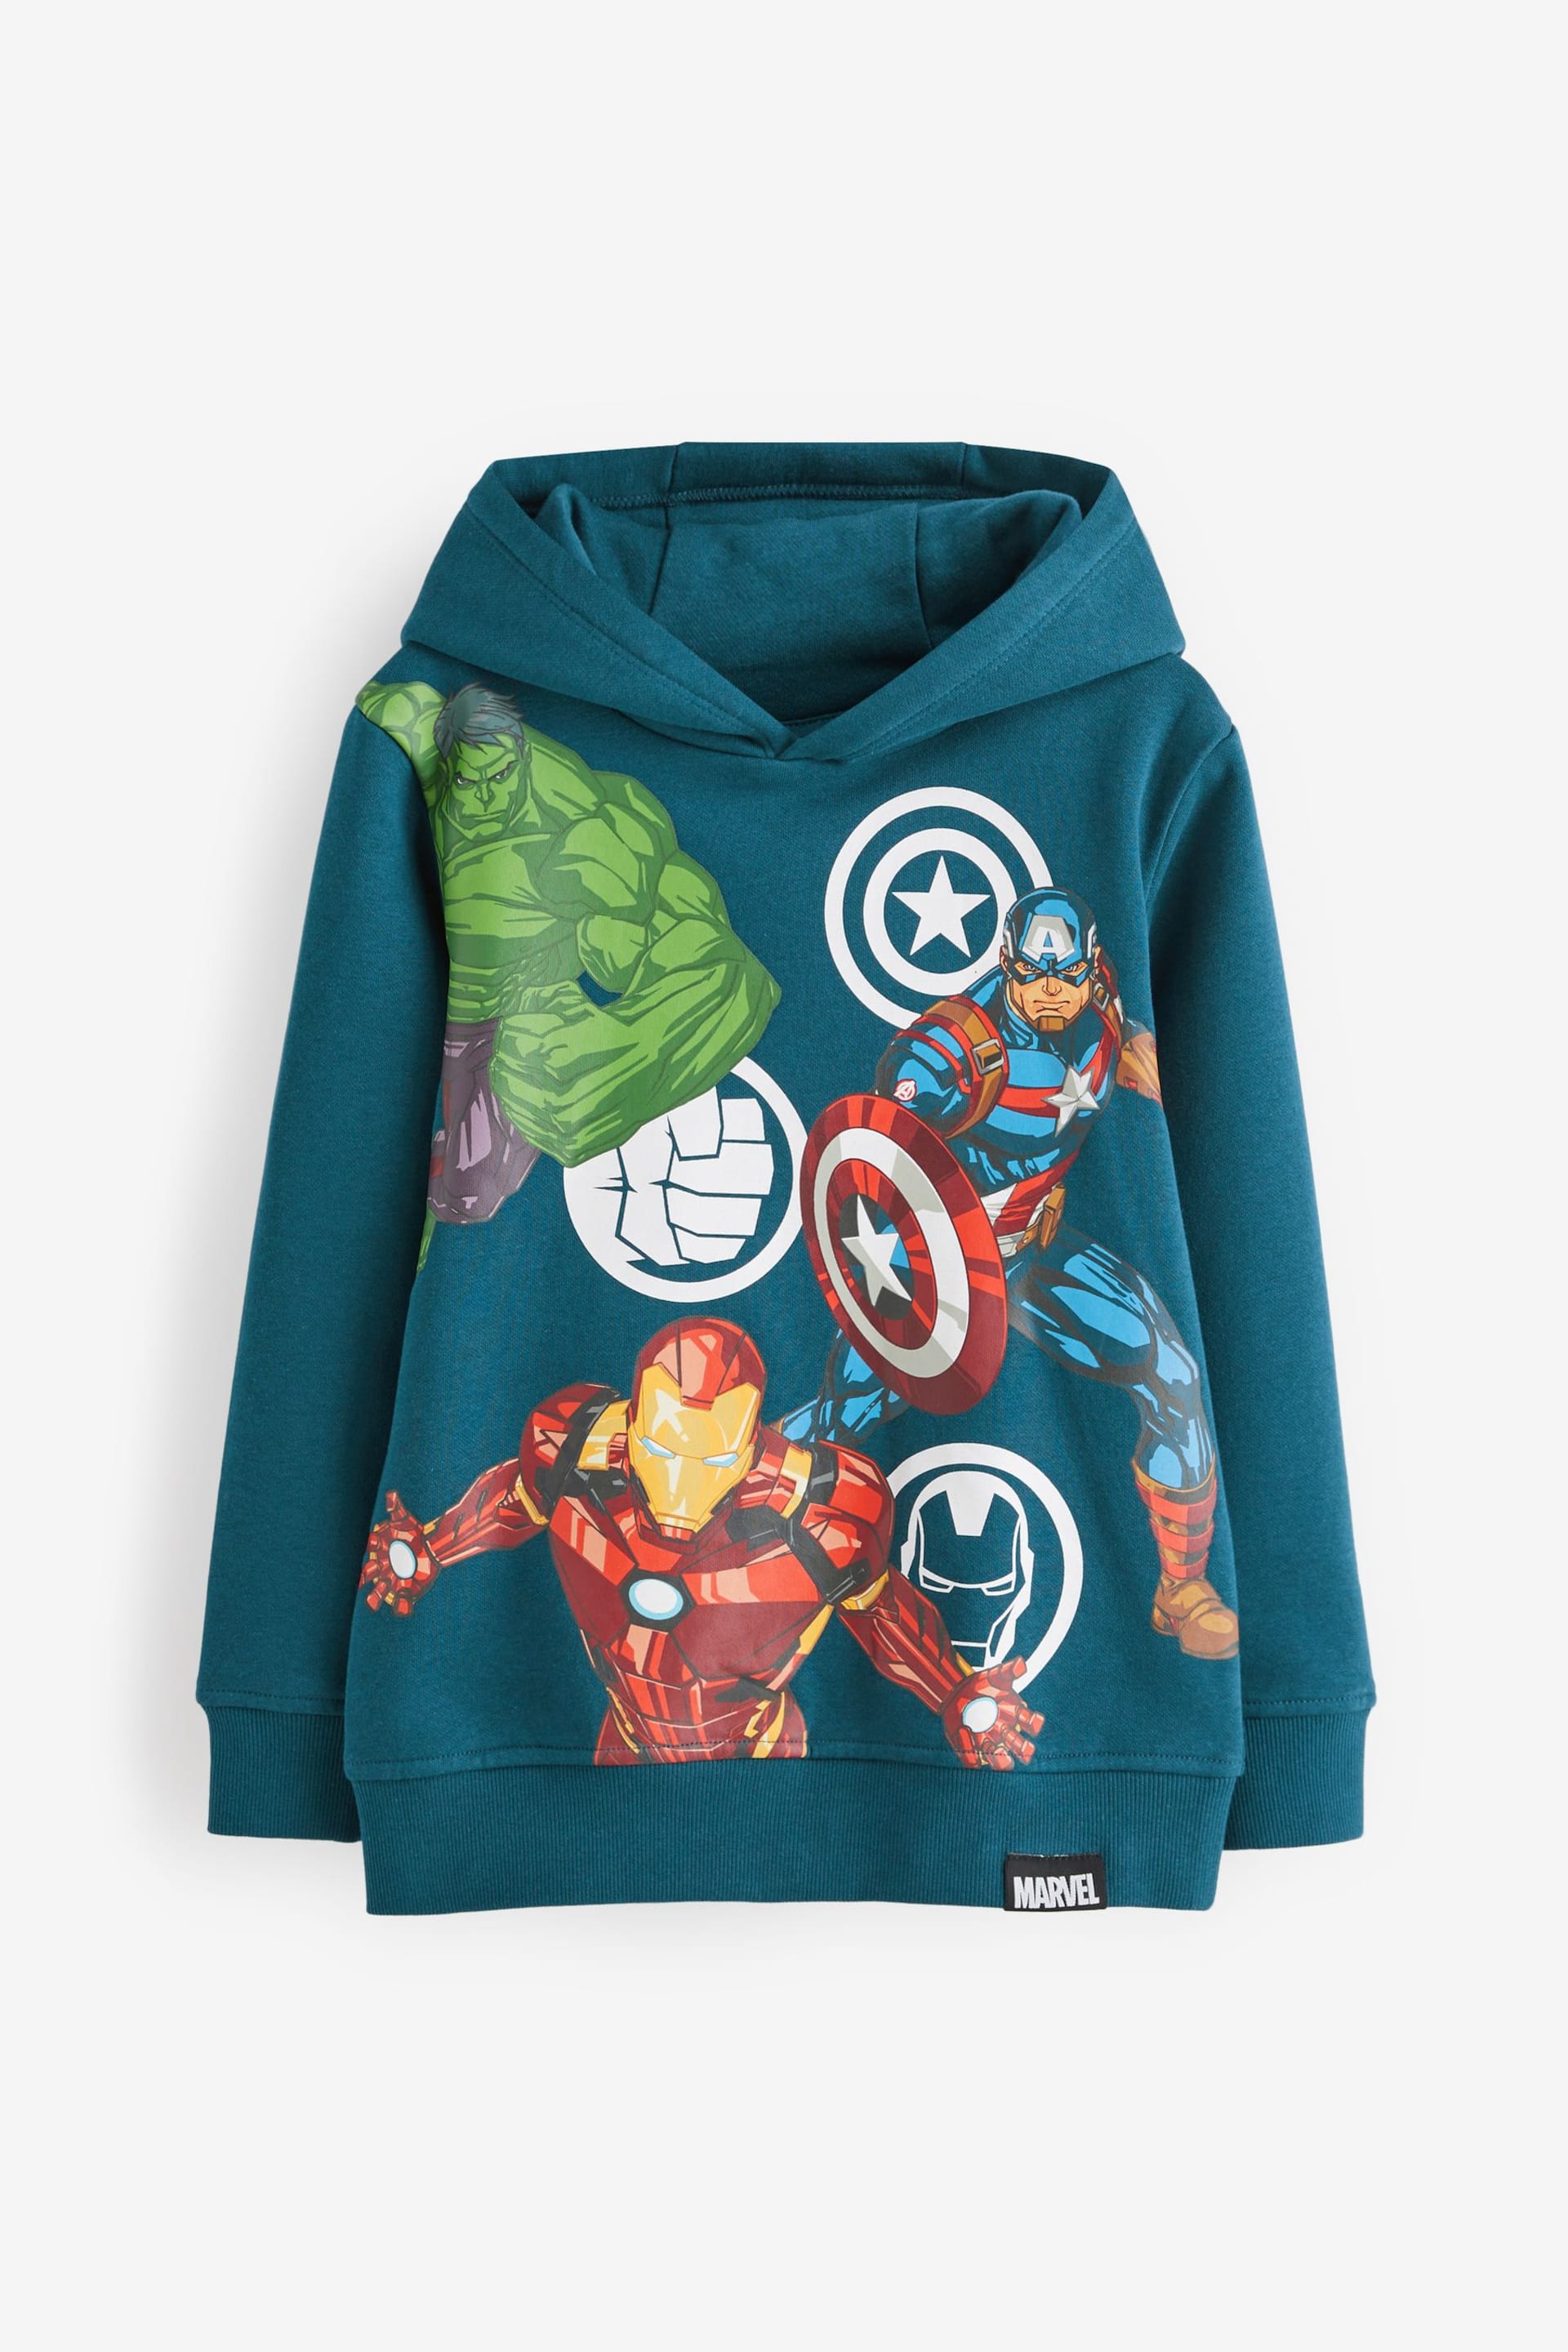 Teal Blue Marvel Graphic License Hoodie (3-16yrs) - Image 1 of 3